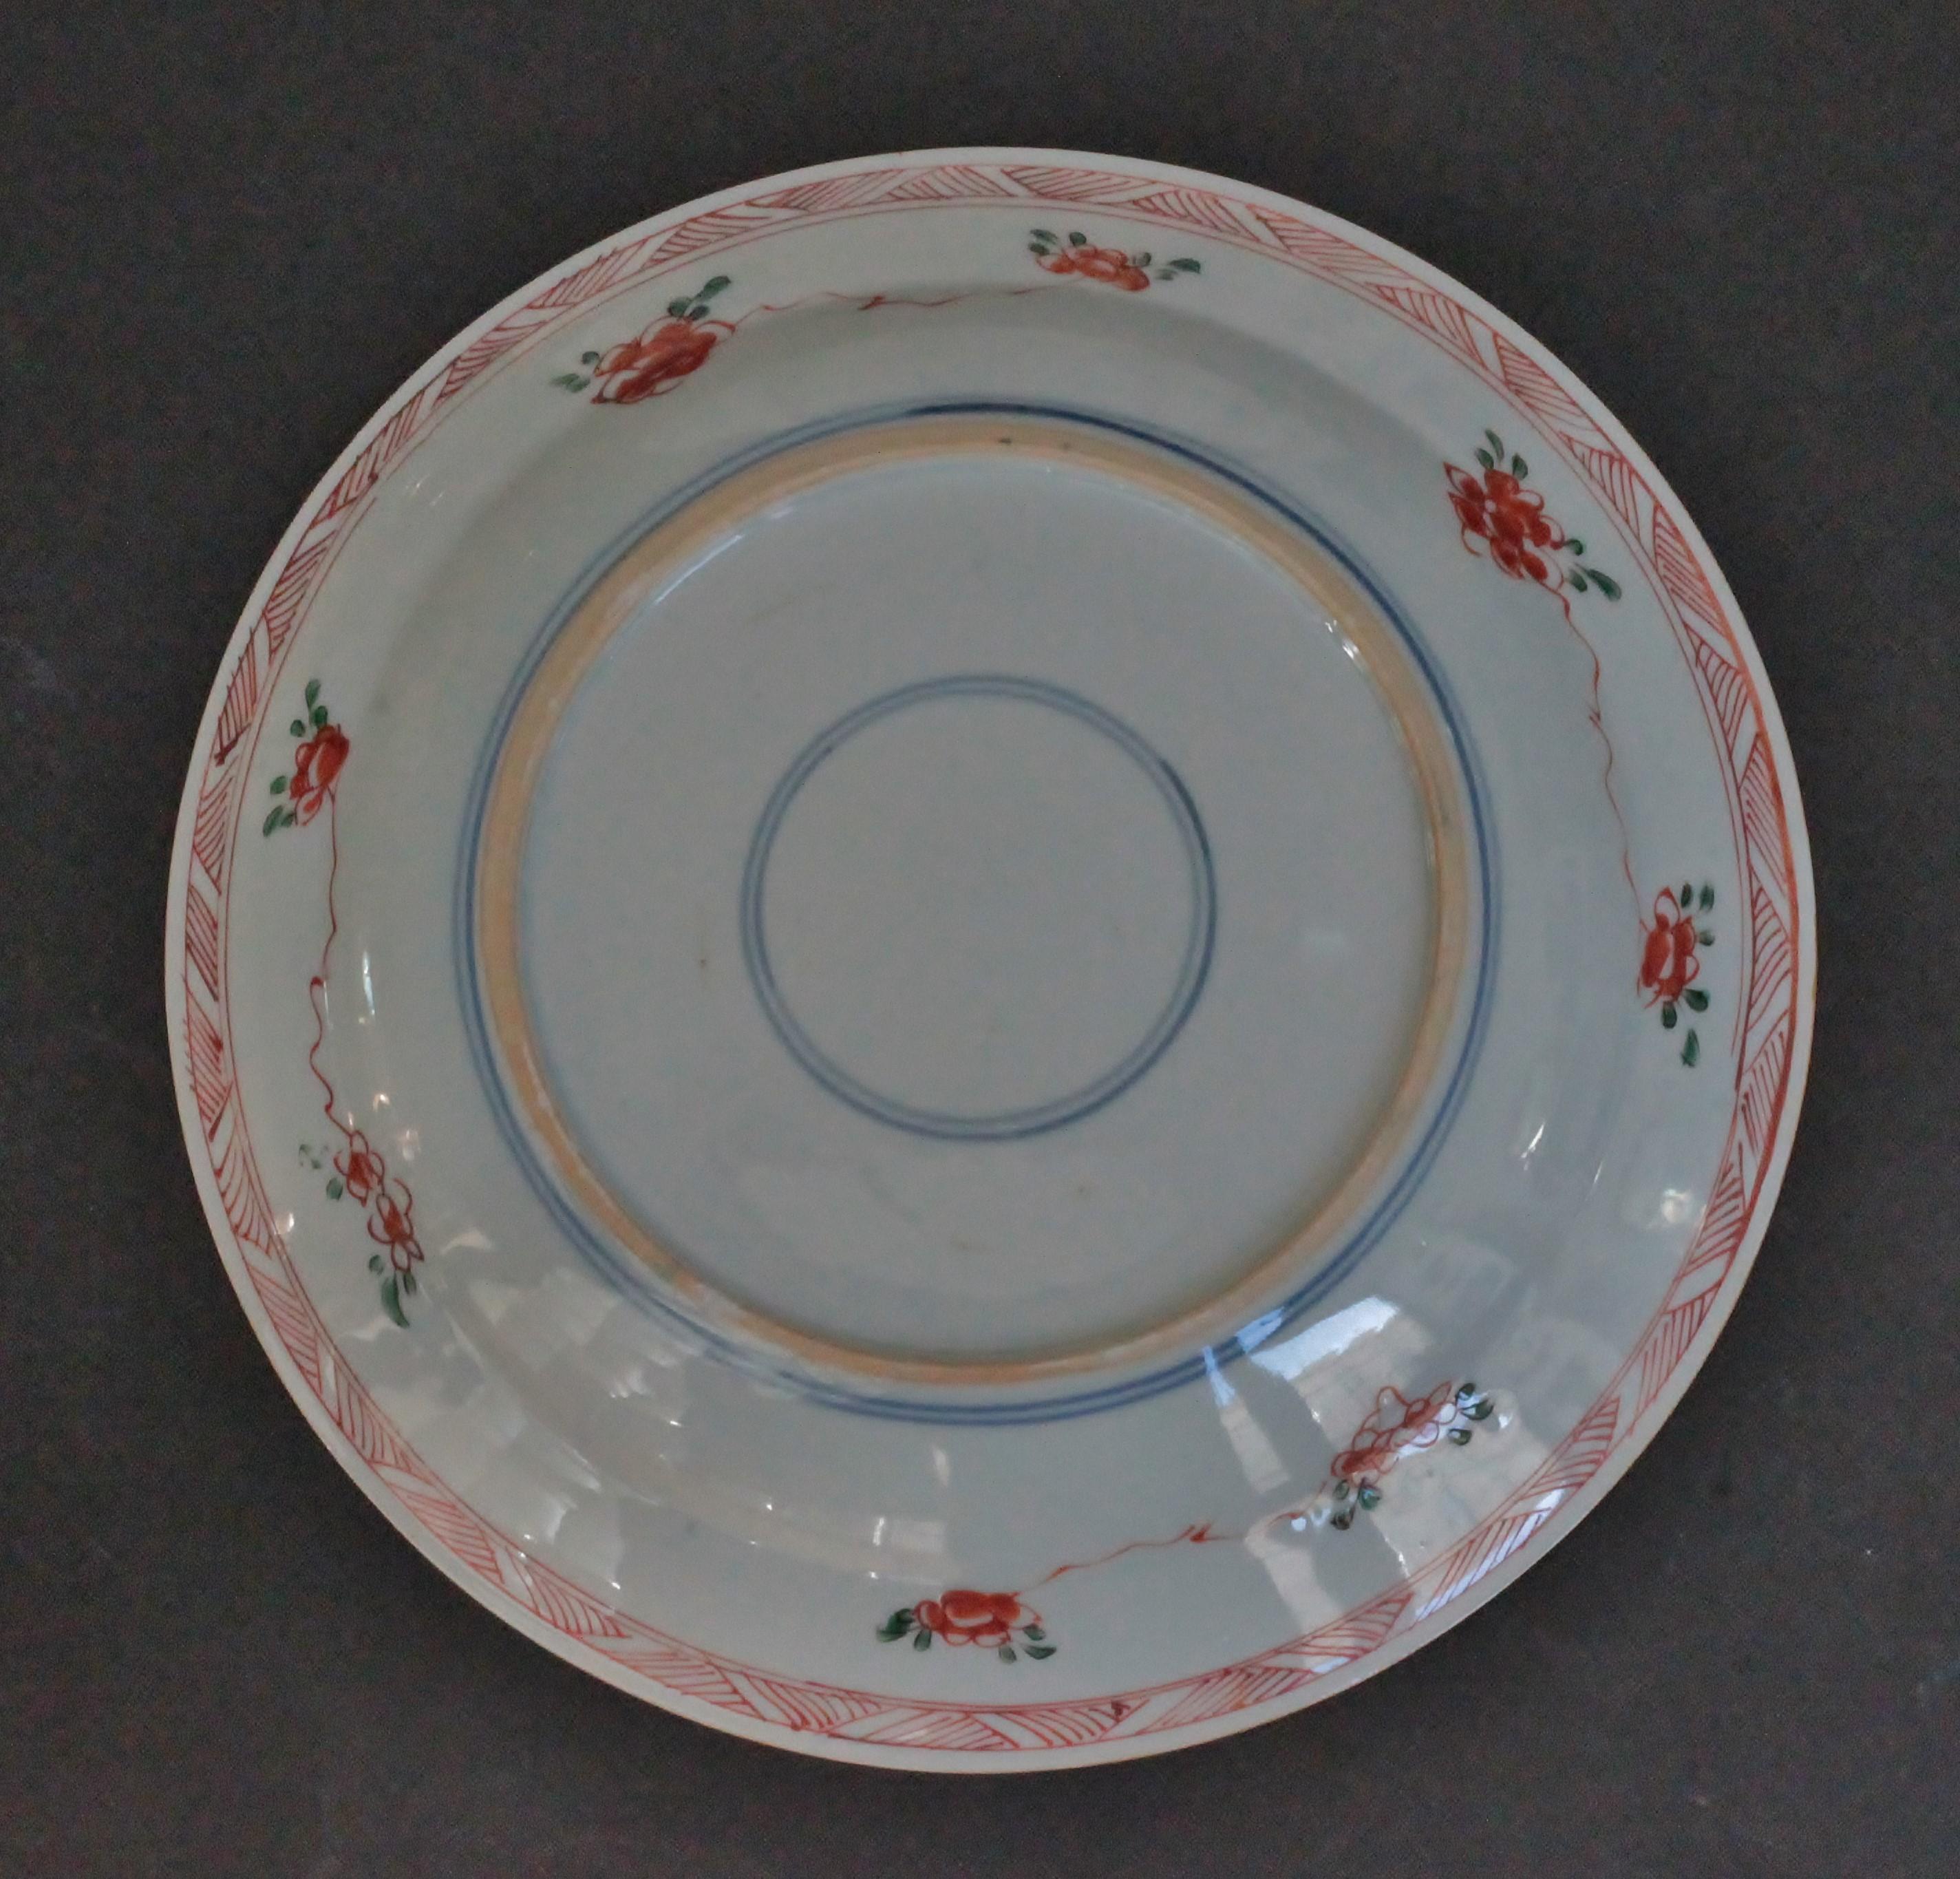 Early 18th Century Two Famille Verte Plates in China Porcelain, Kangxi Period ‘1662-1722’